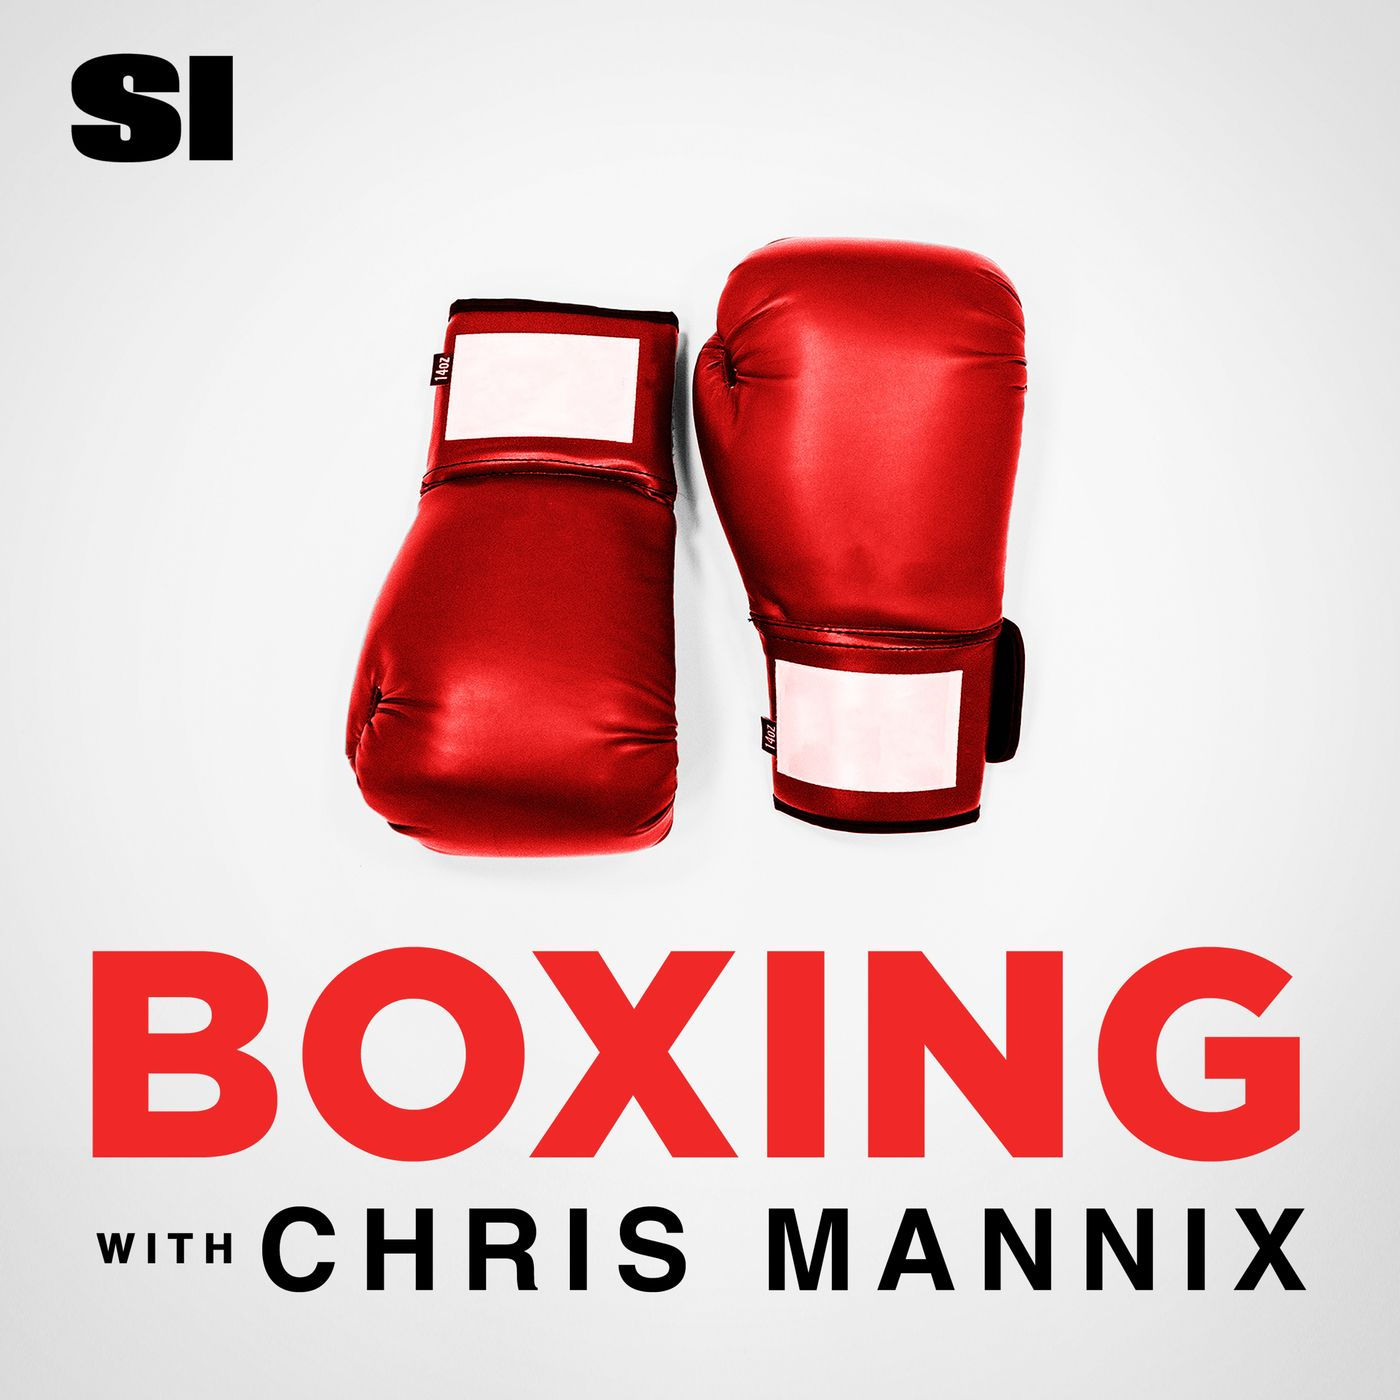 A highlight from Boxing with Chris Mannix - Jacob "Stitch" Duran